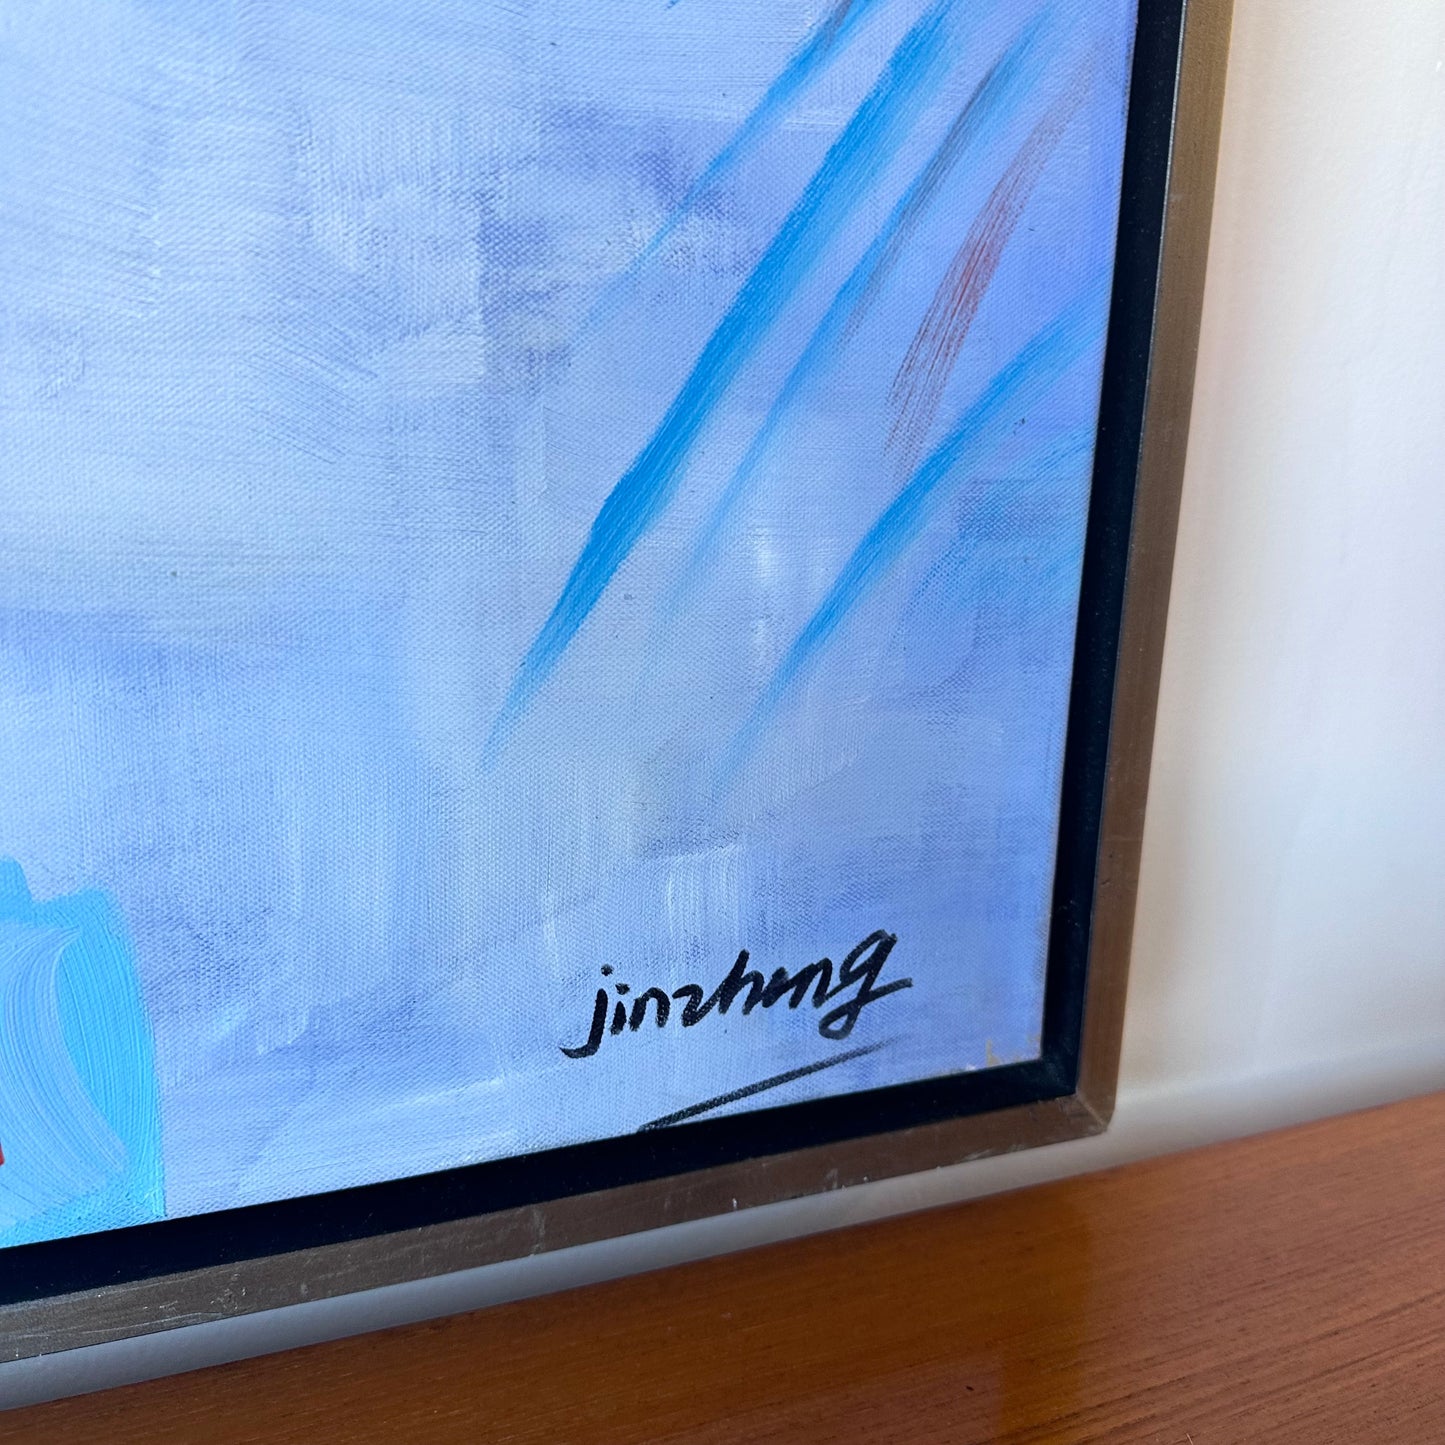 SIGNED AND FRAMED ABSTRACT ARTWORK BY ARTIST JINZHONG